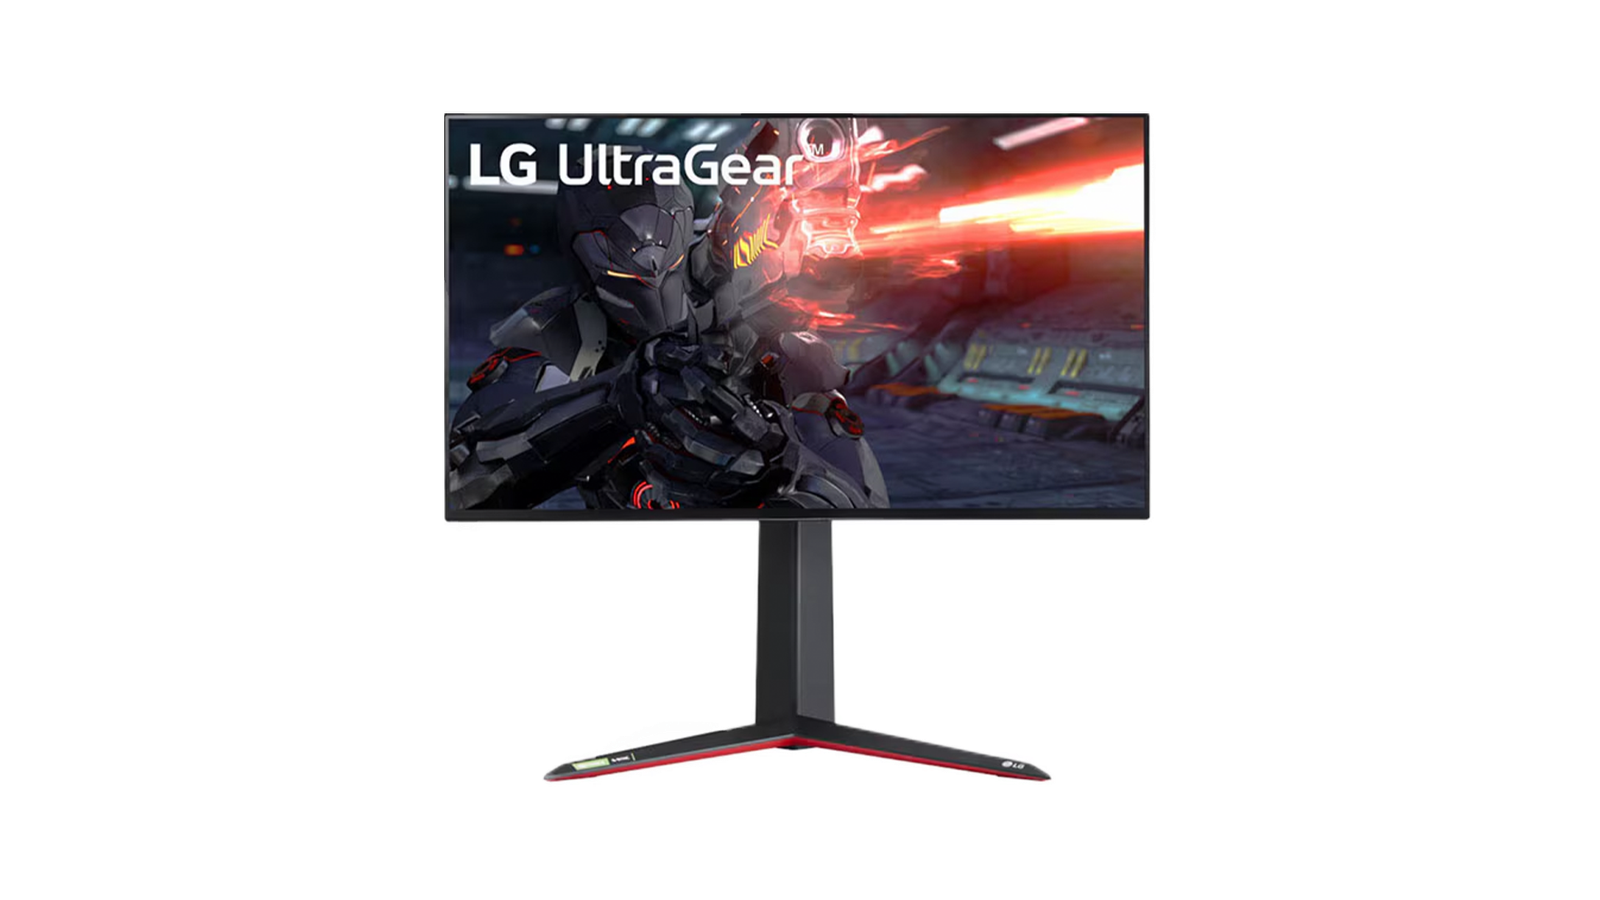 LG UltraGear 27GN950 - The best price-performance gaming monitor.